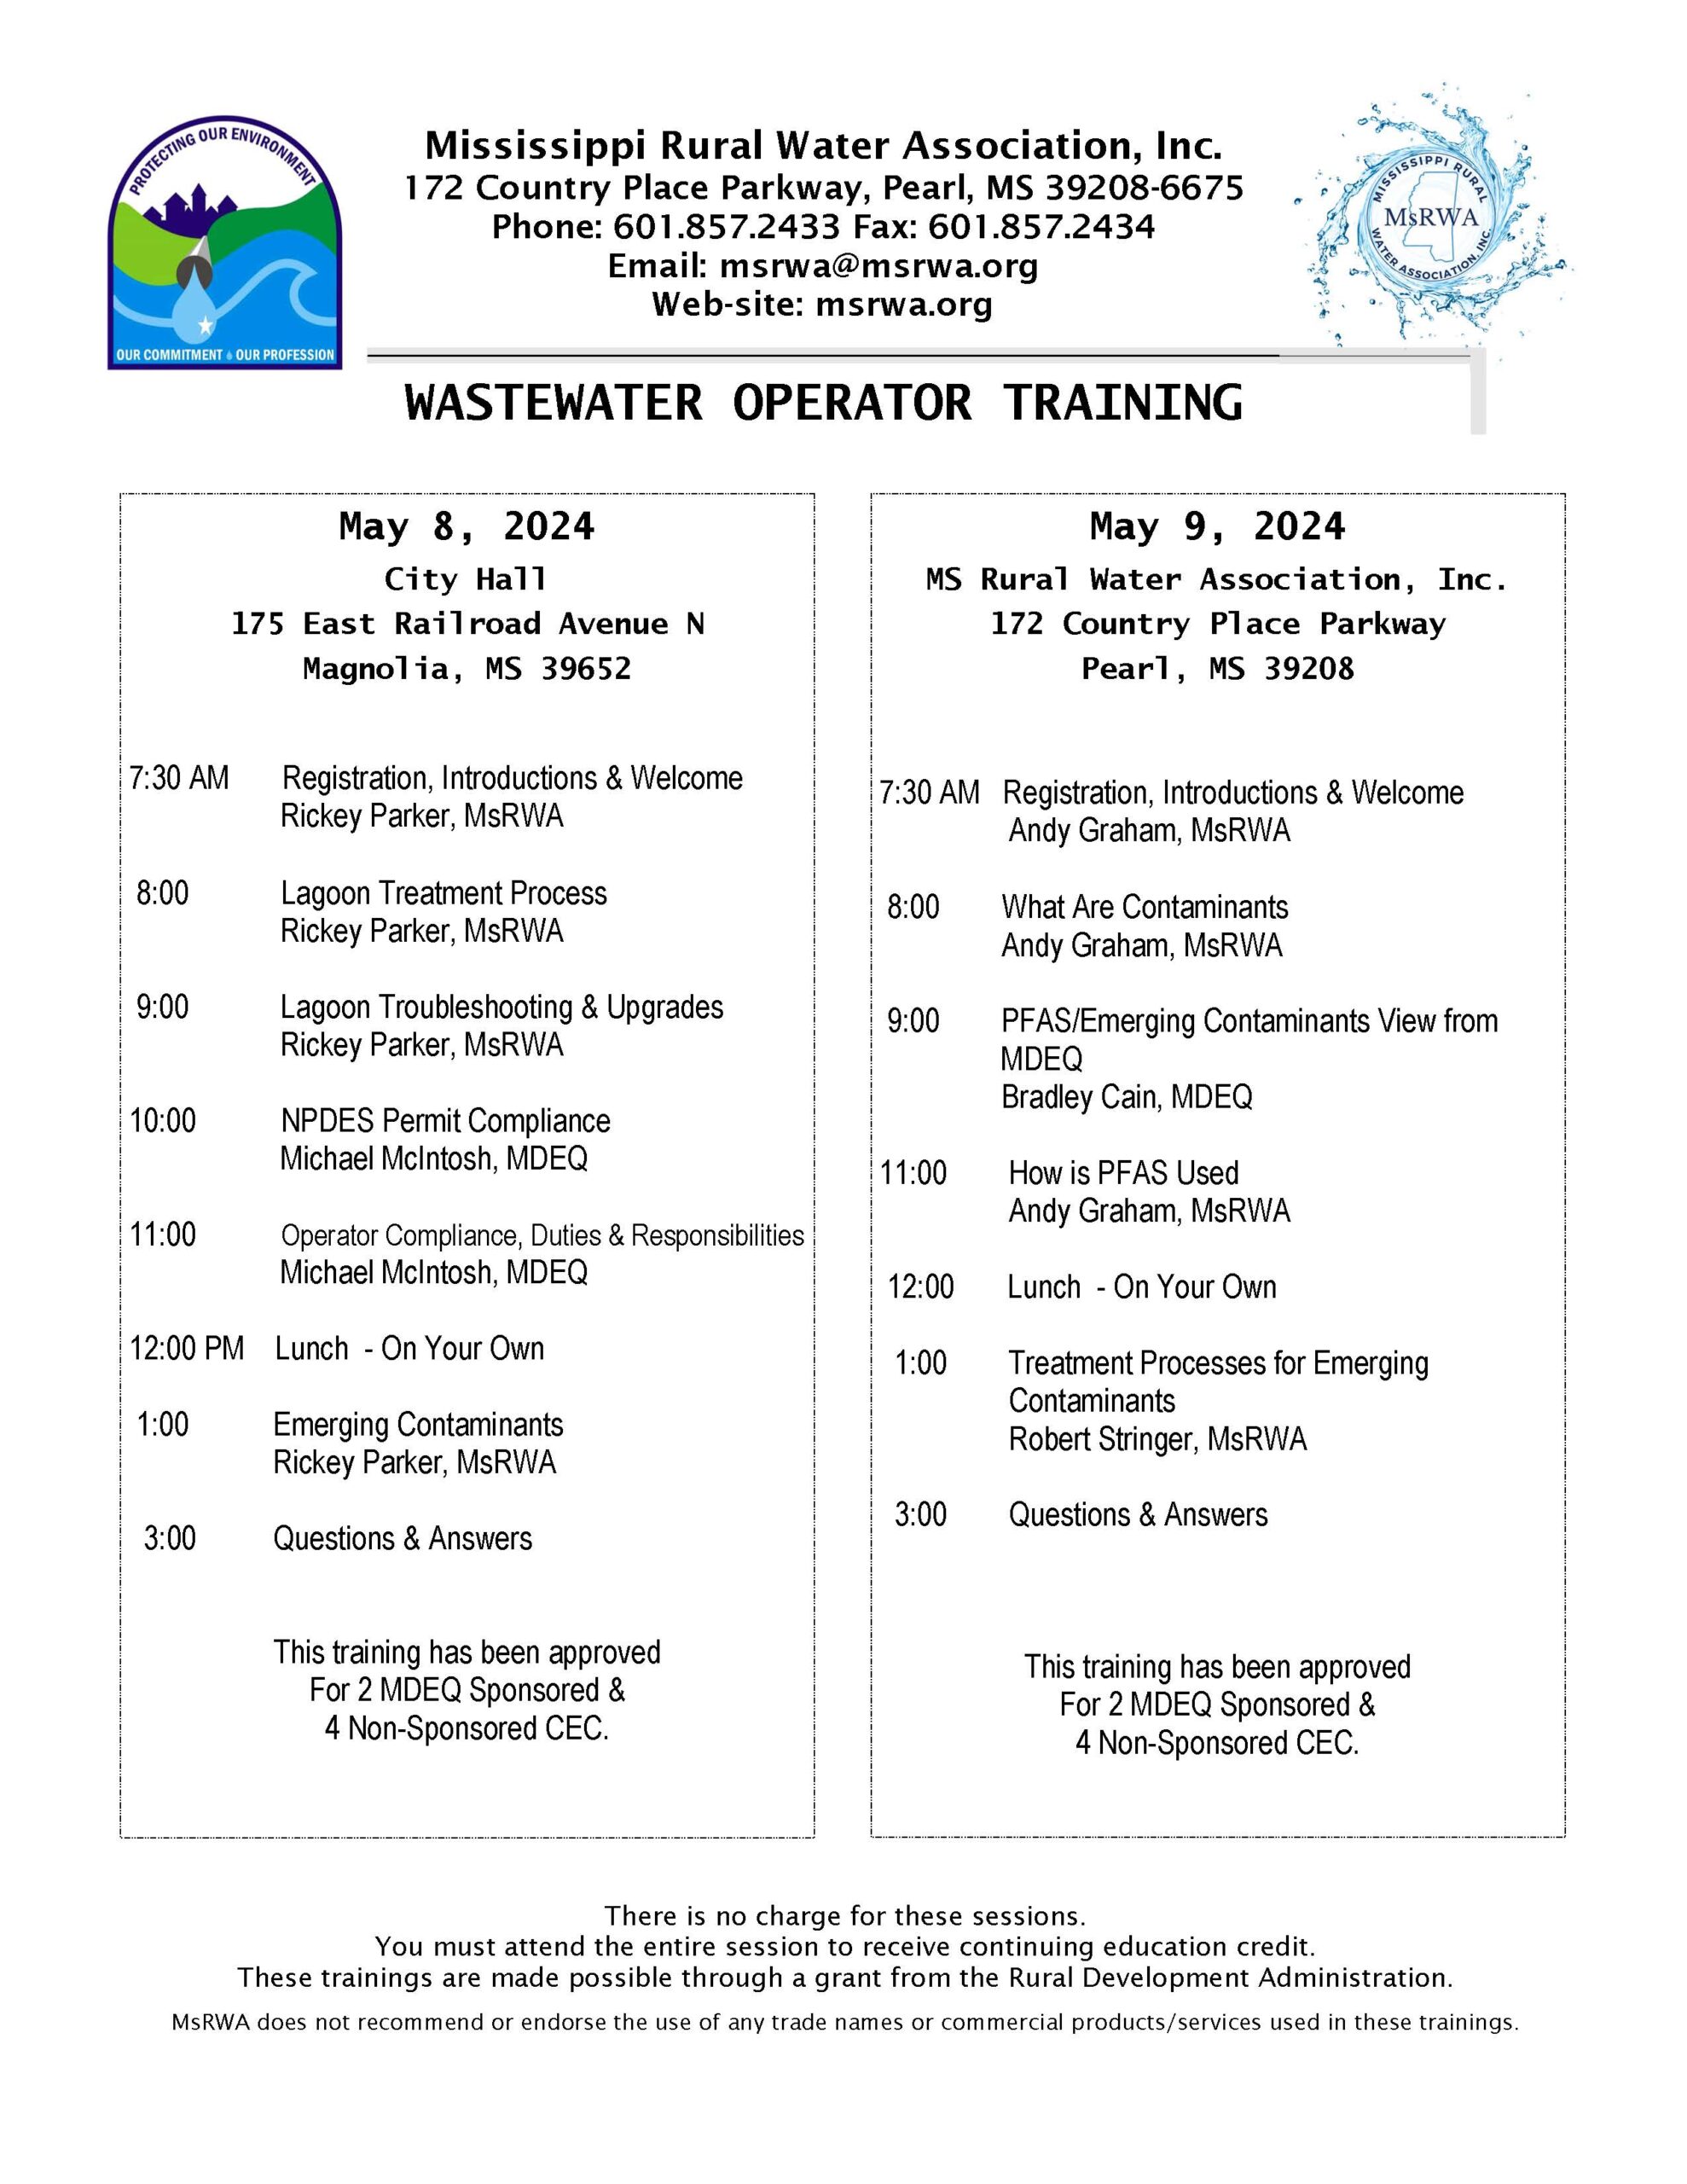 Wastewater Training - 2S/4NS - Pearl @ MS Rural Water Association, Inc.